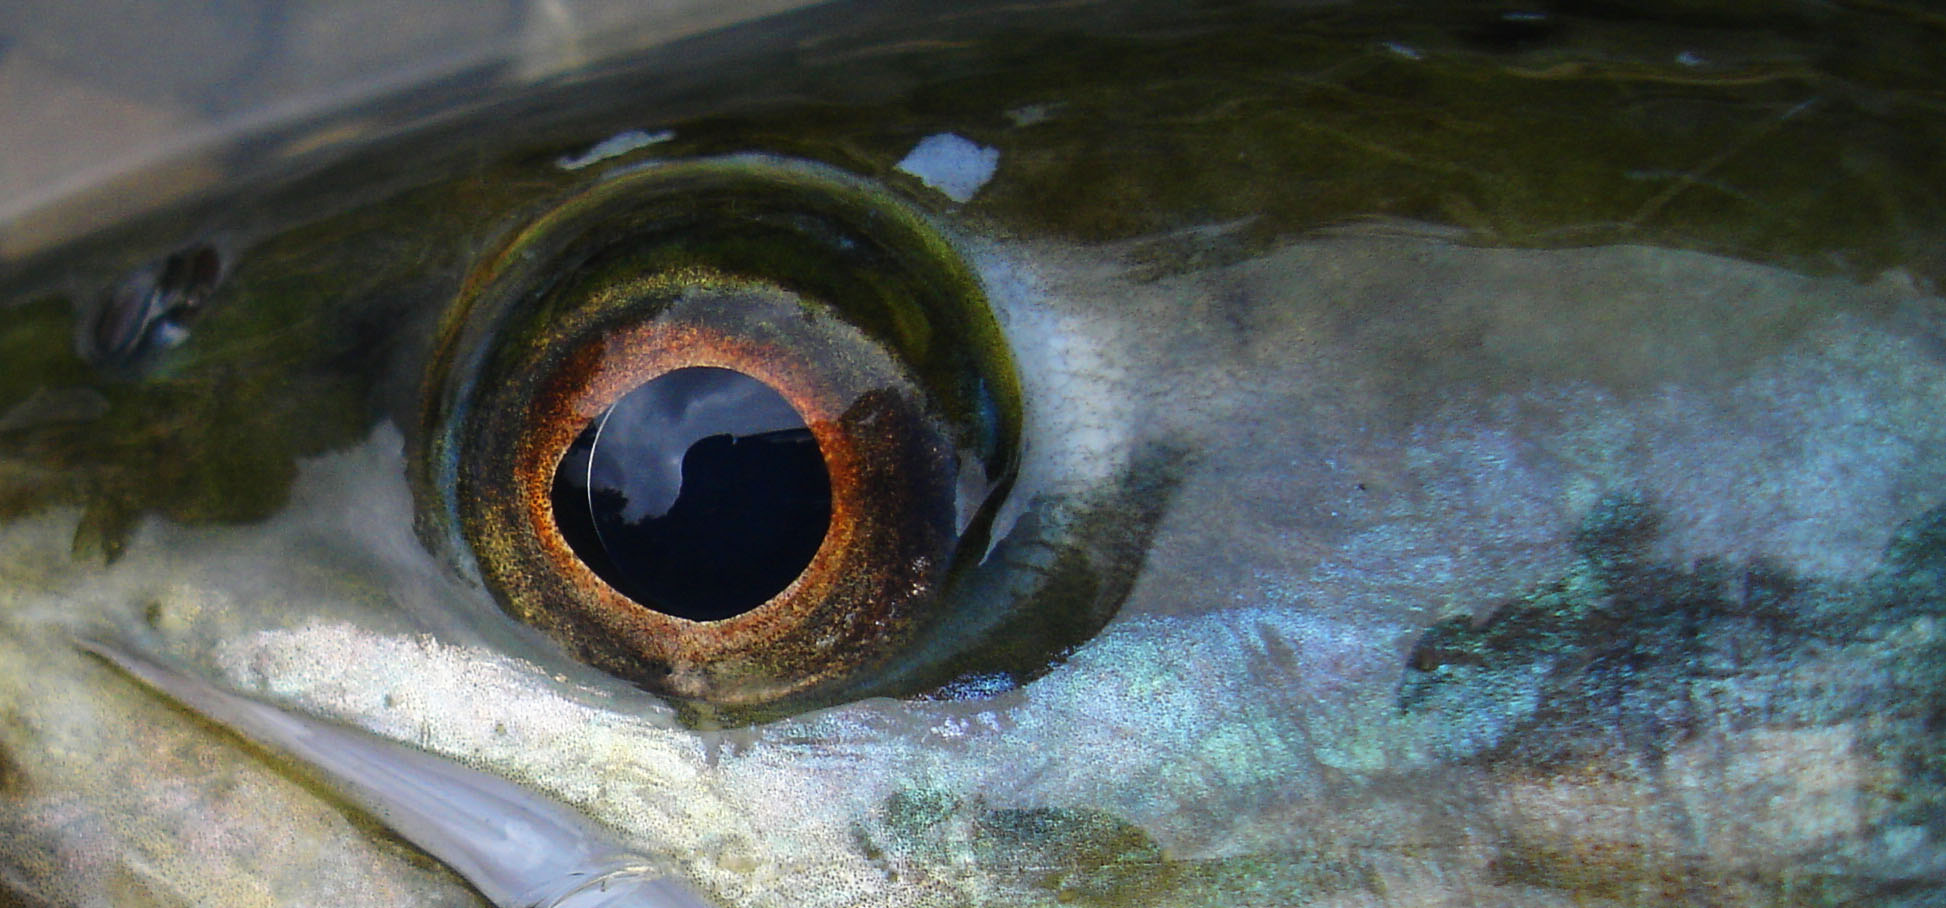 a trout's eye close up